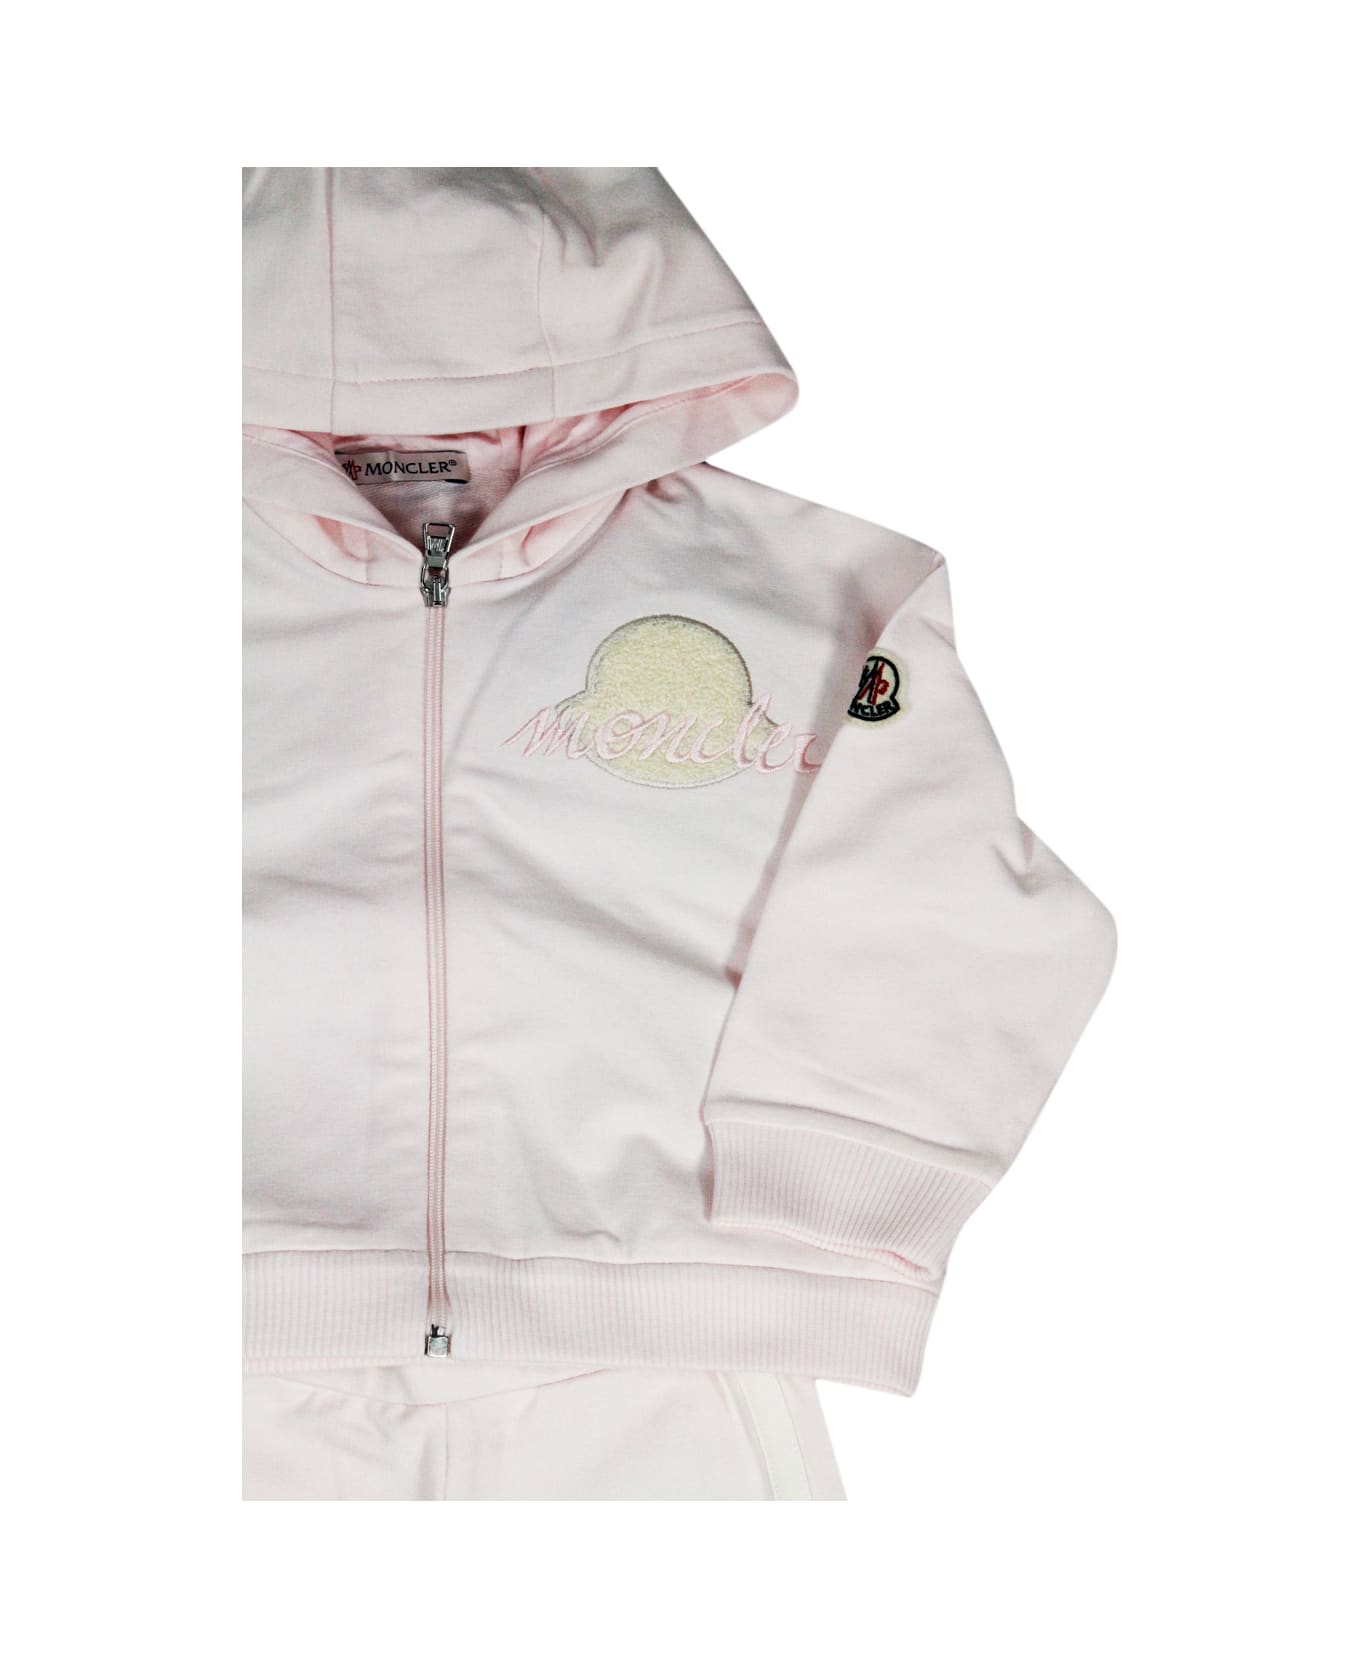 Moncler Complete With Zip-up Sweatshirt With Long-sleeved Hood In Fine Cotton And Trousers With Elastic Waist. Logo On The Chest - Pink ボディスーツ＆セットアップ